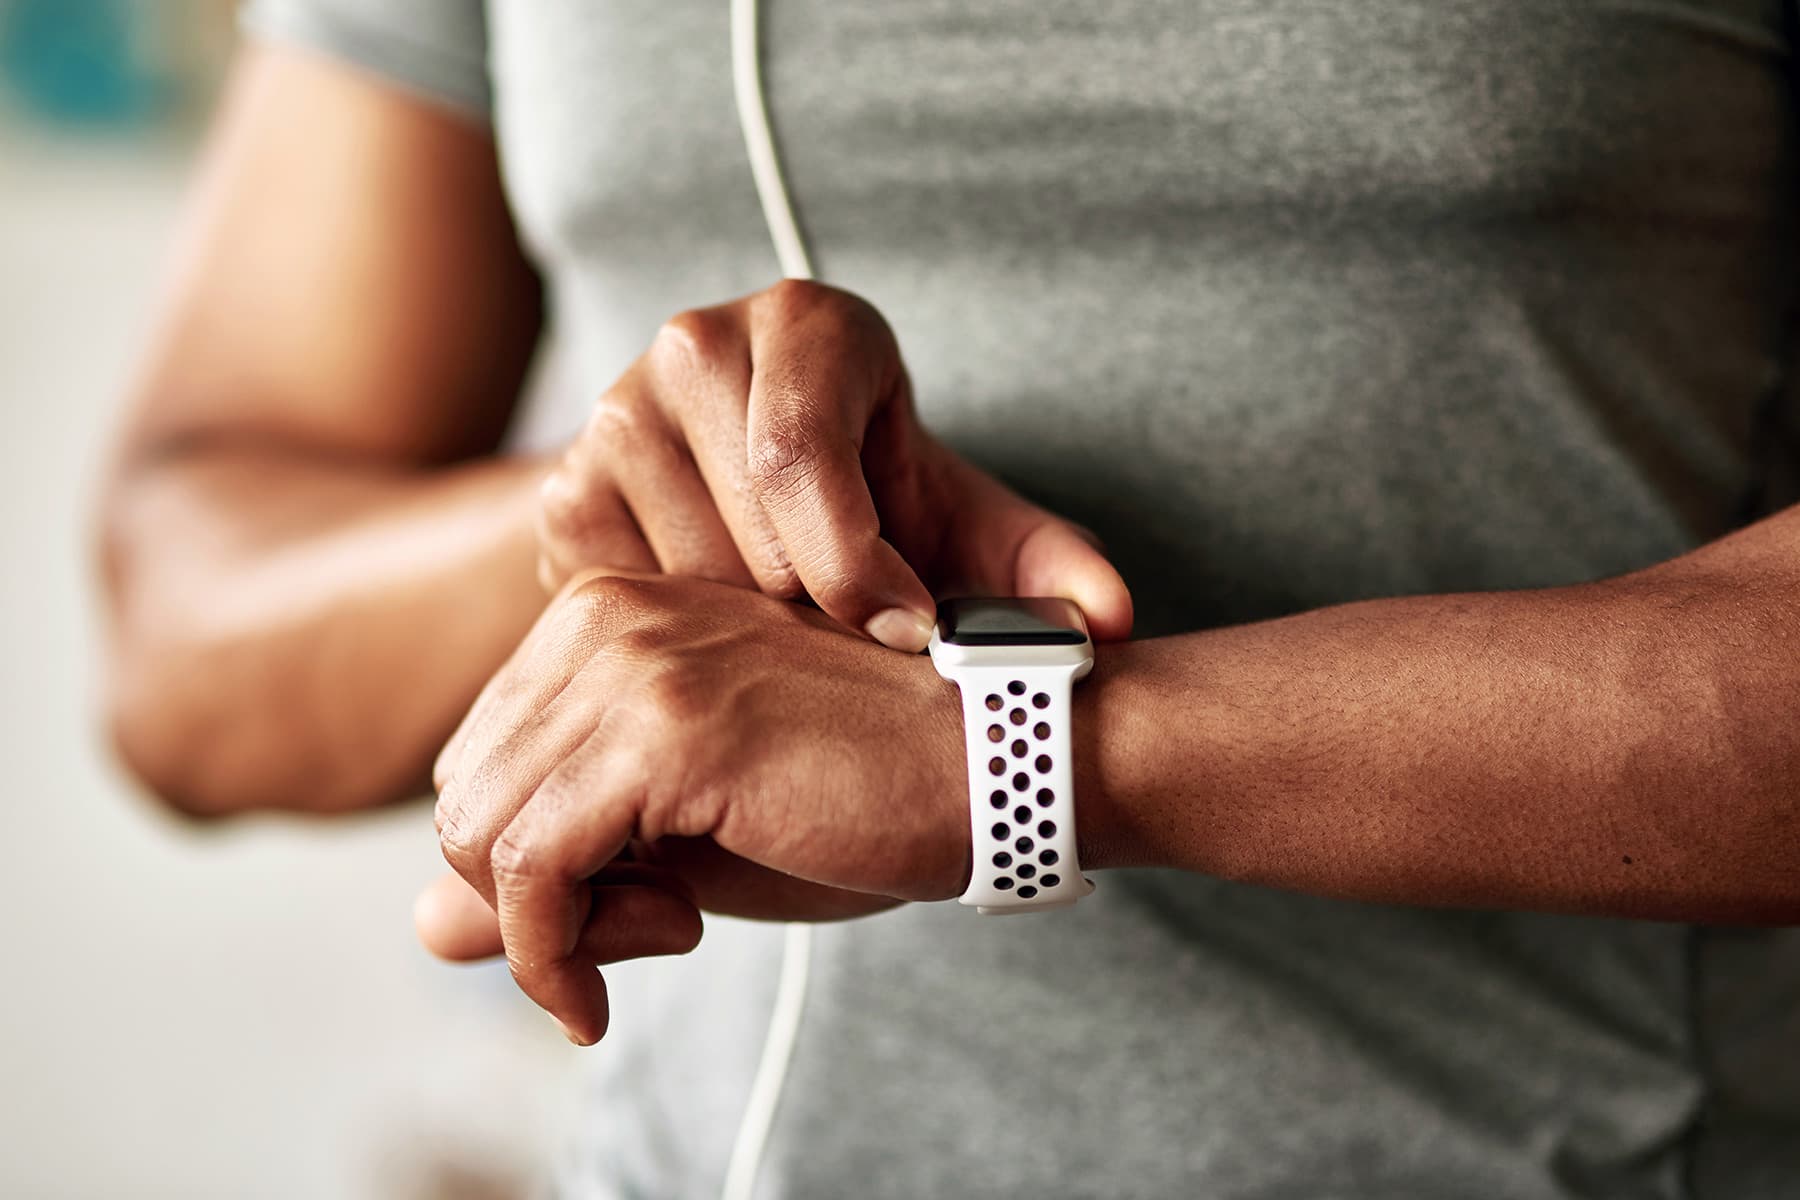 Your Smartwatch Says You’re in AFib. Now What?